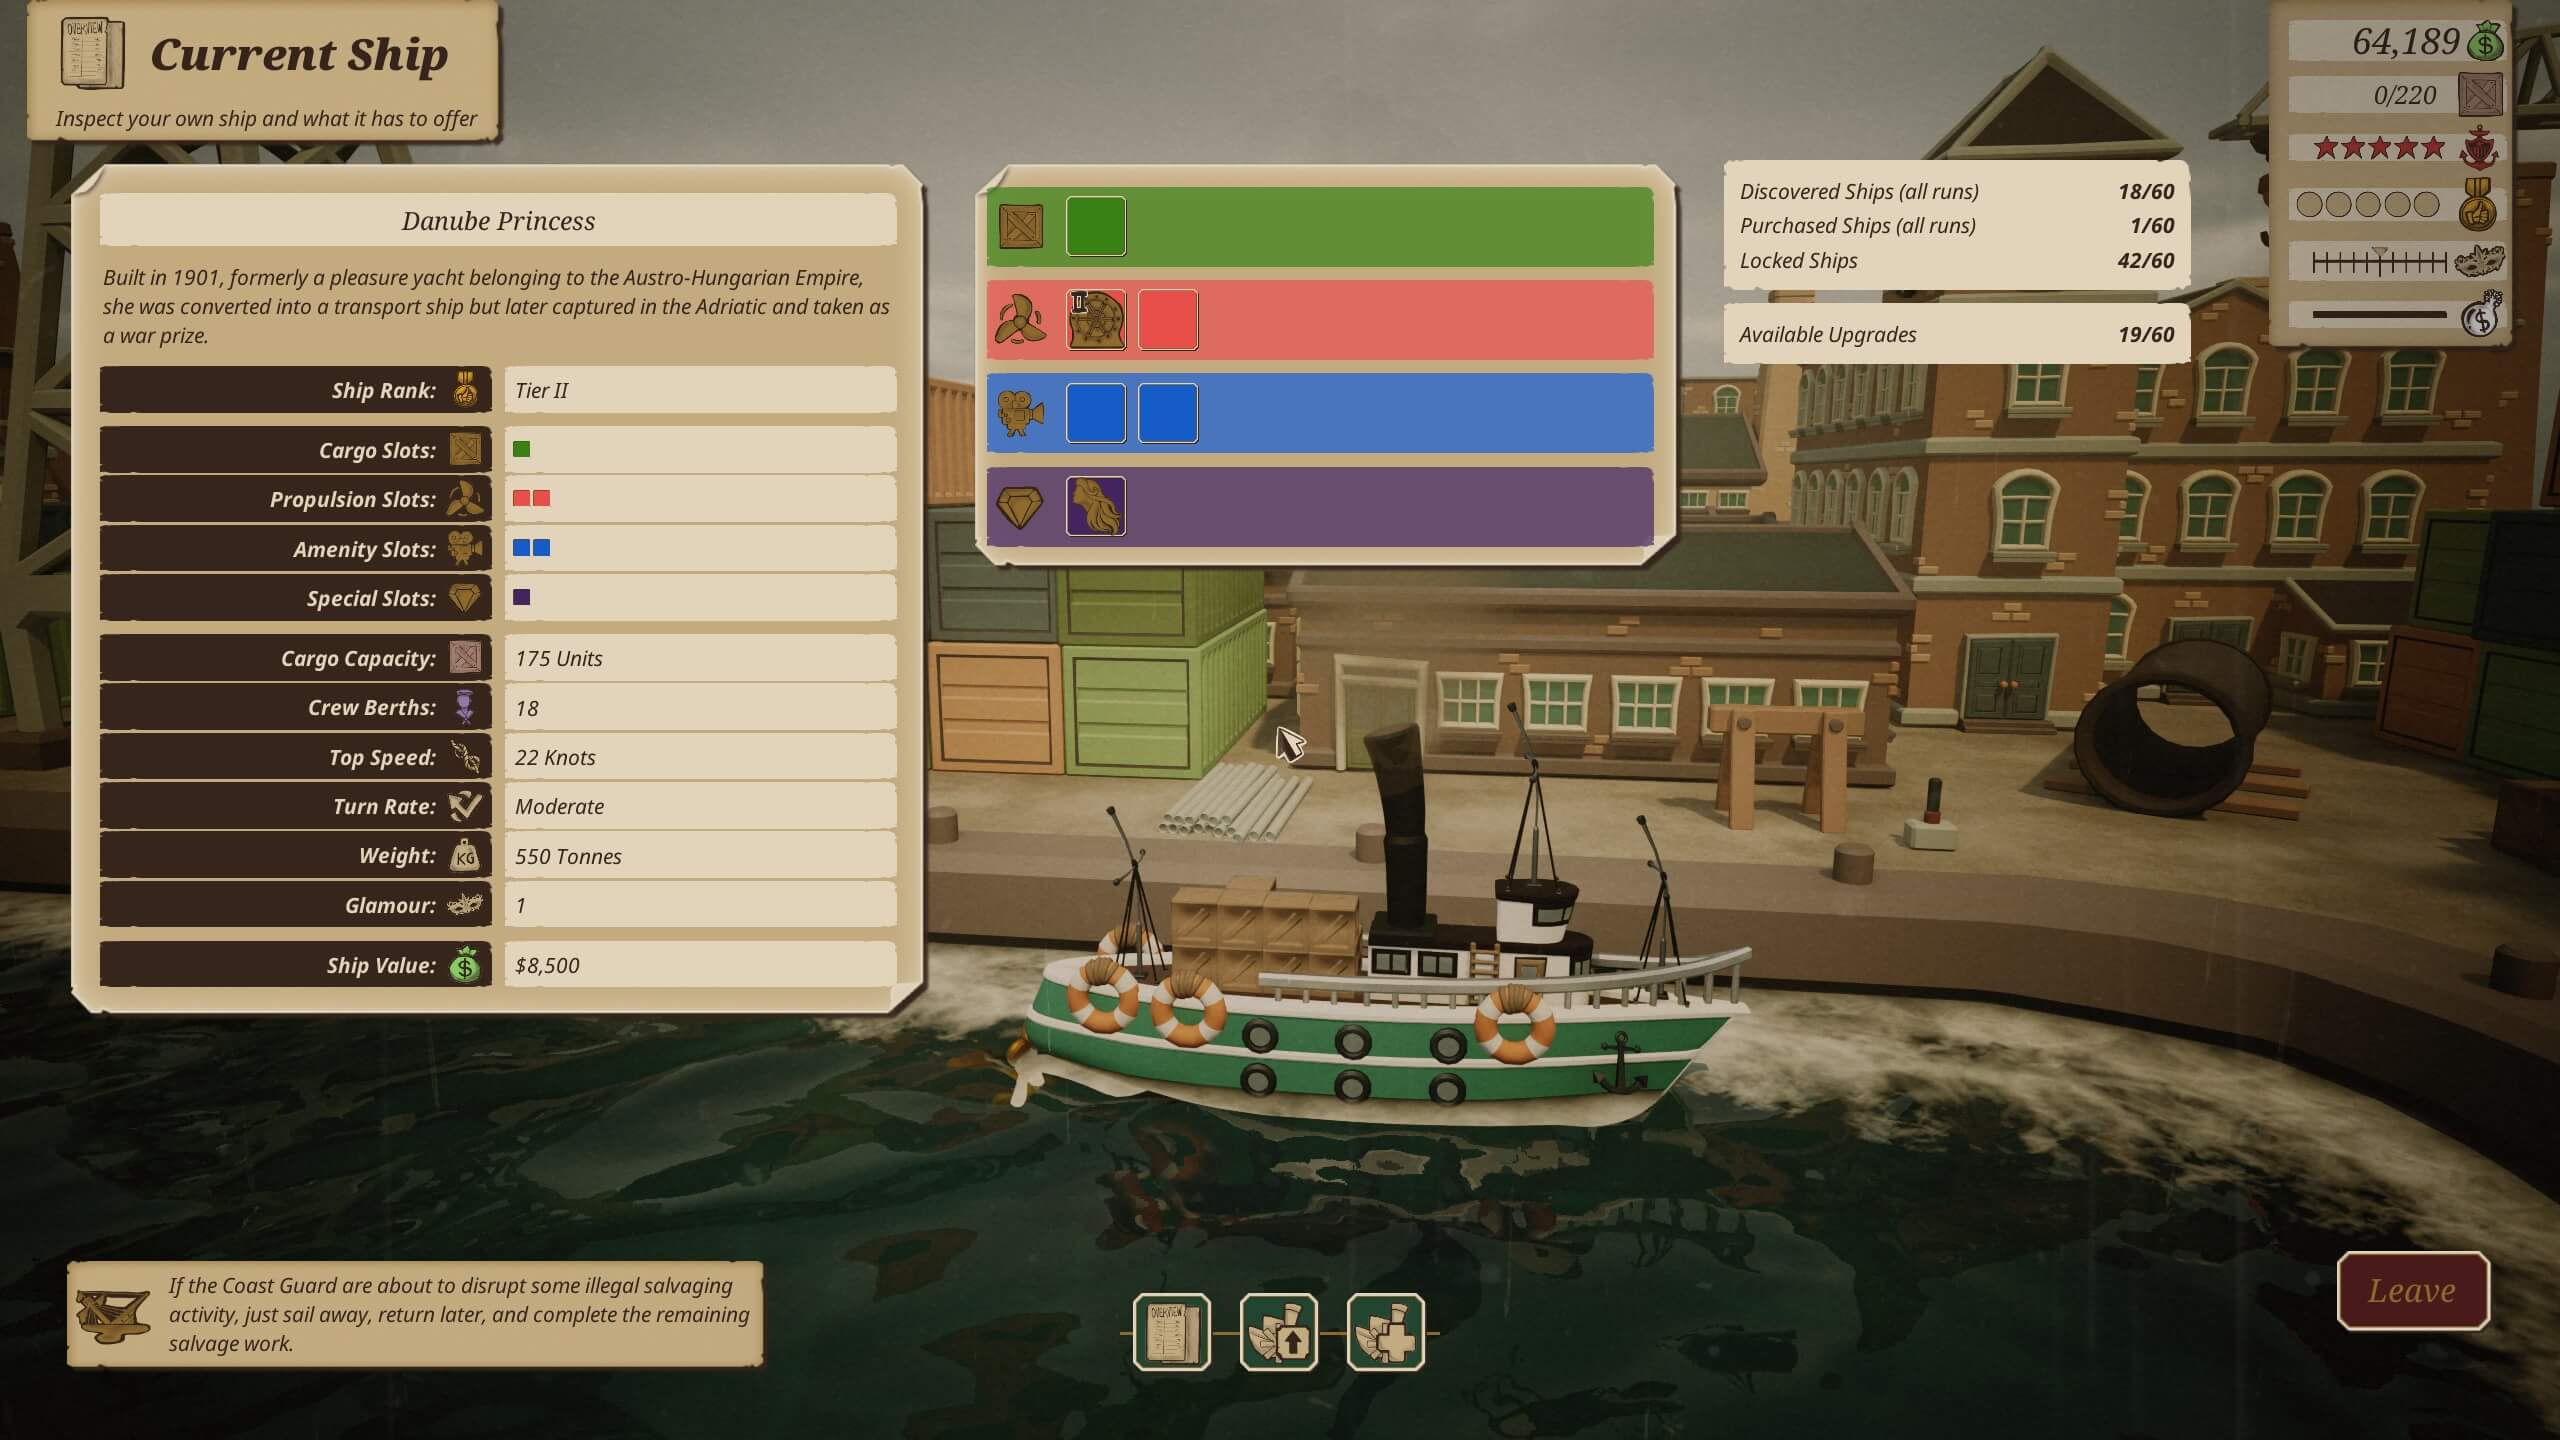 this game screen shows the ship upgrades, showing which tier of ship this is as well as which upgrade slots there. our ship is at the bottom and is a pretty green colour.